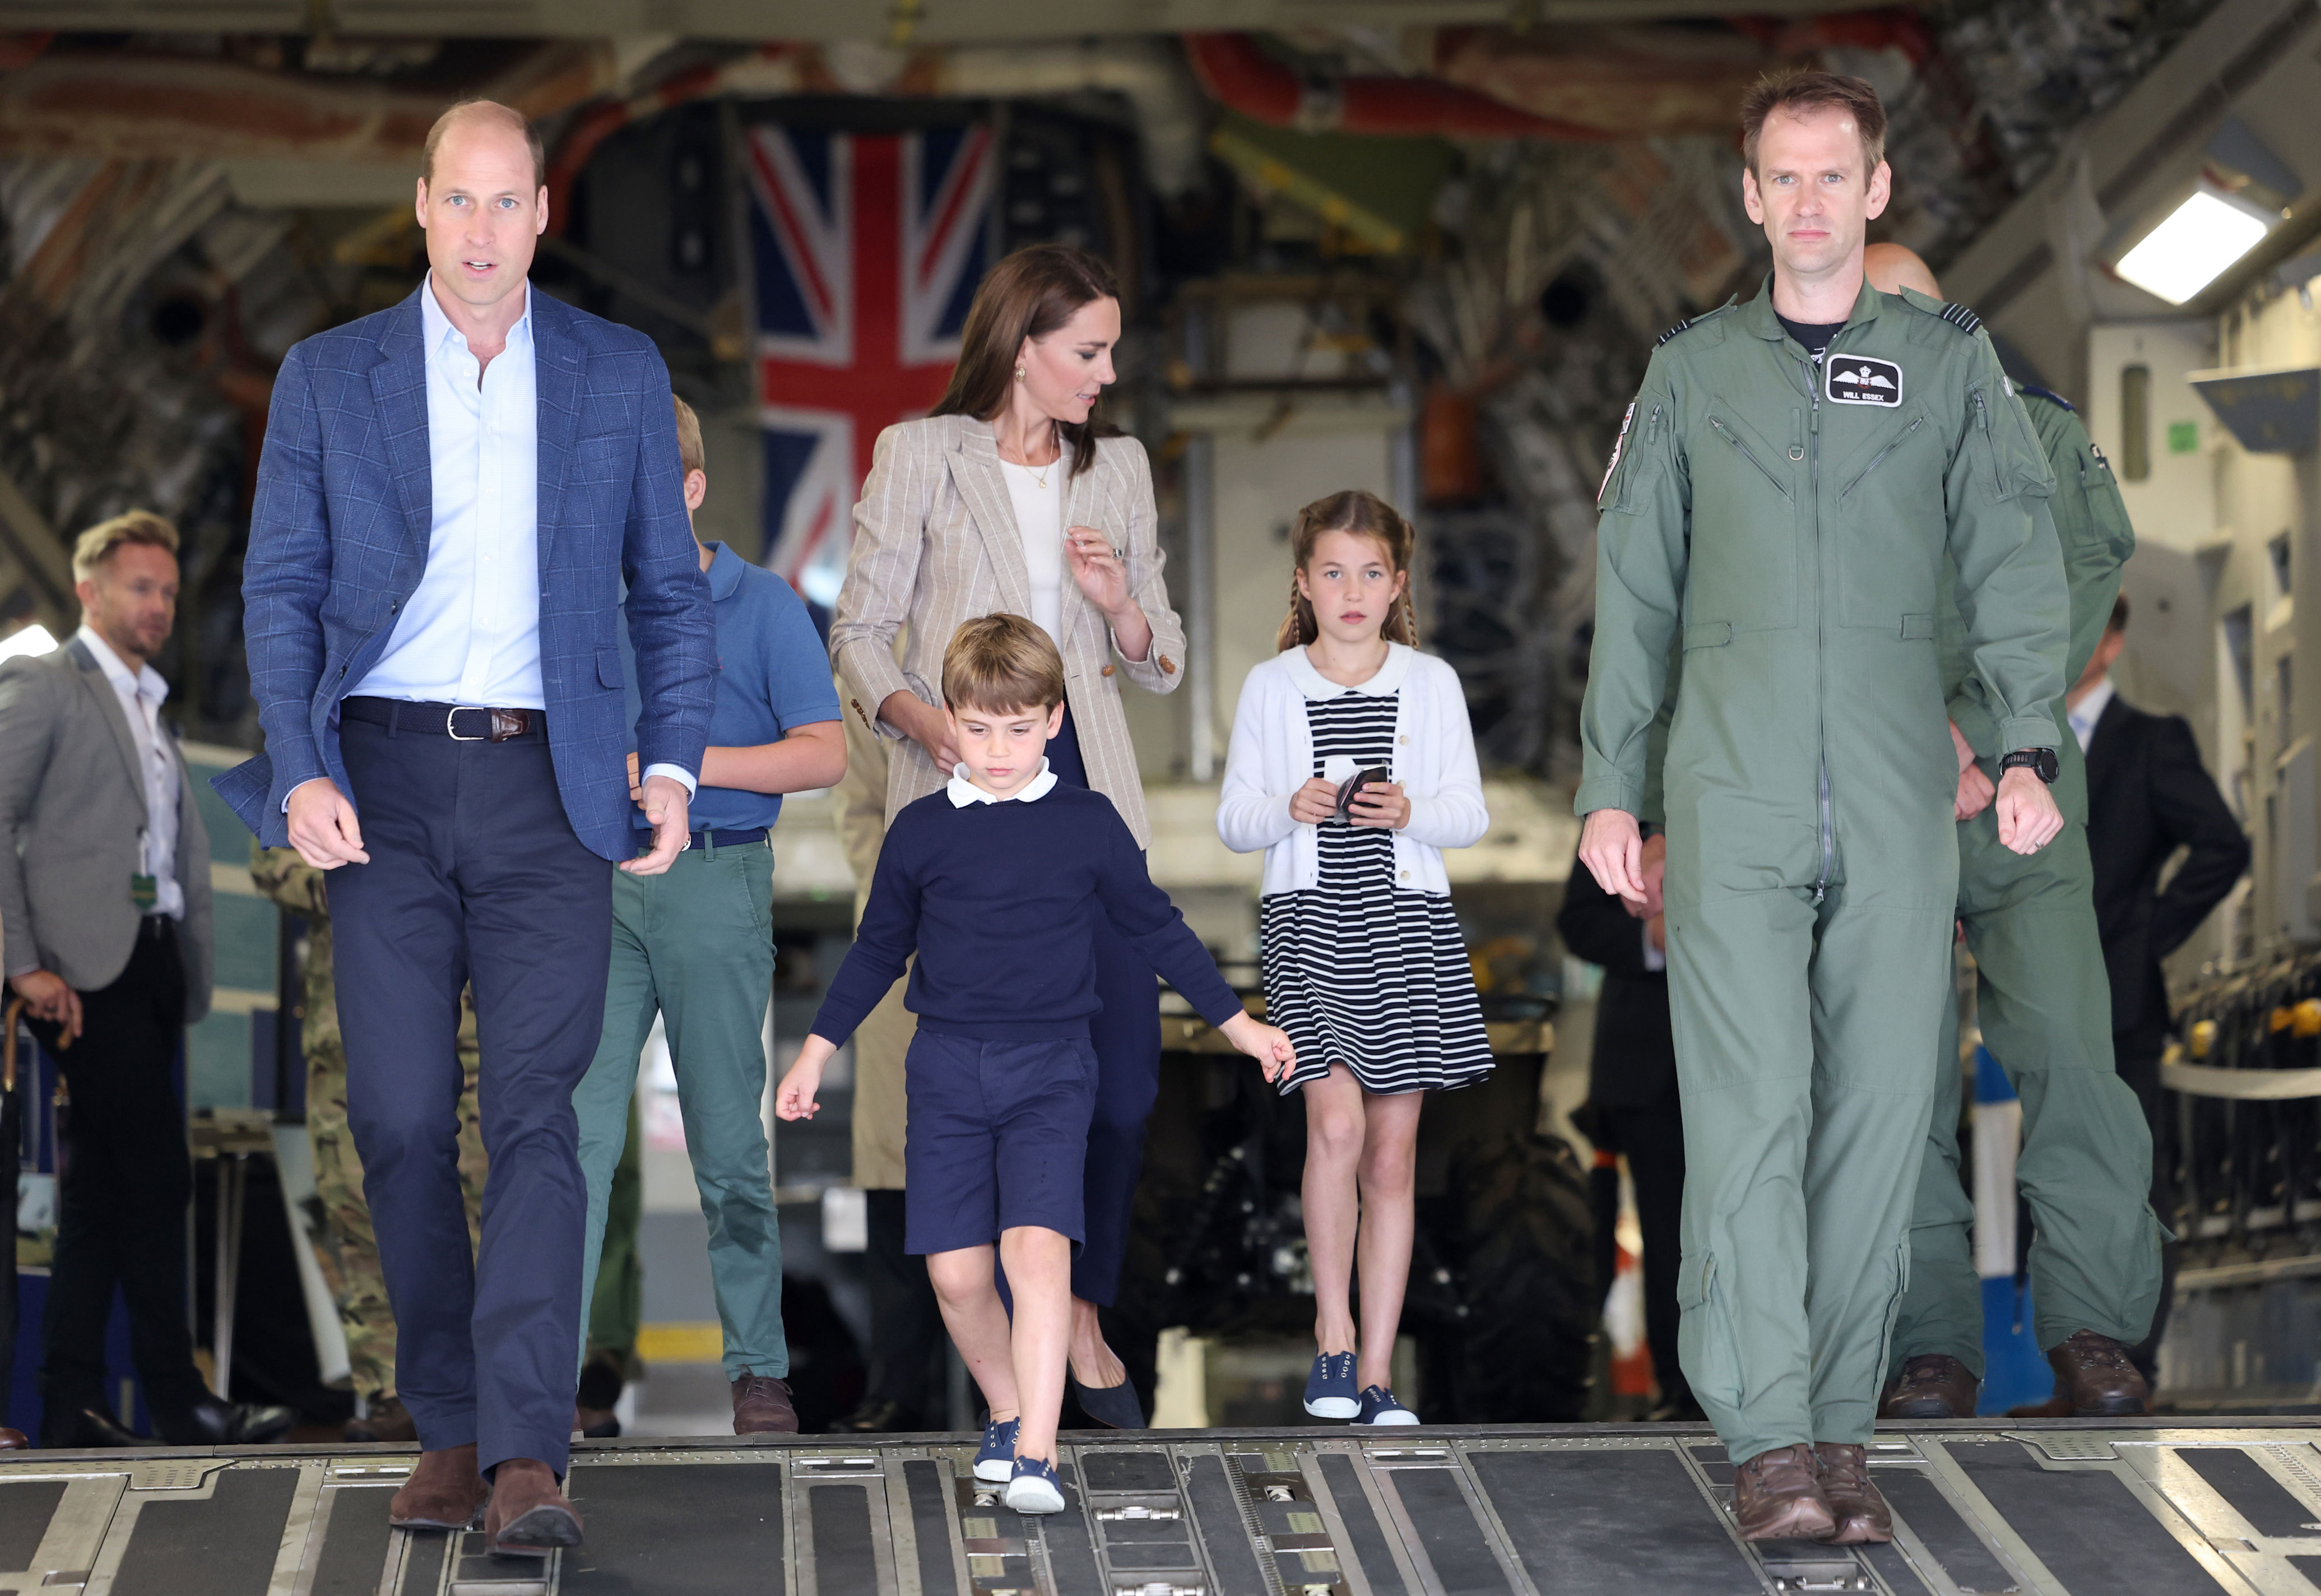 <p><a href="https://www.wonderwall.com/celebrity/profiles/overview/prince-william-482.article">Prince William</a> and Princess Kate brought Prince George, Prince Louis and Princess Charlotte to check out the inside of a Royal Air Force C-17 plane during a visit to the Air Tattoo at RAF Fairford in Fairford, England, on July 14, 2023.</p>